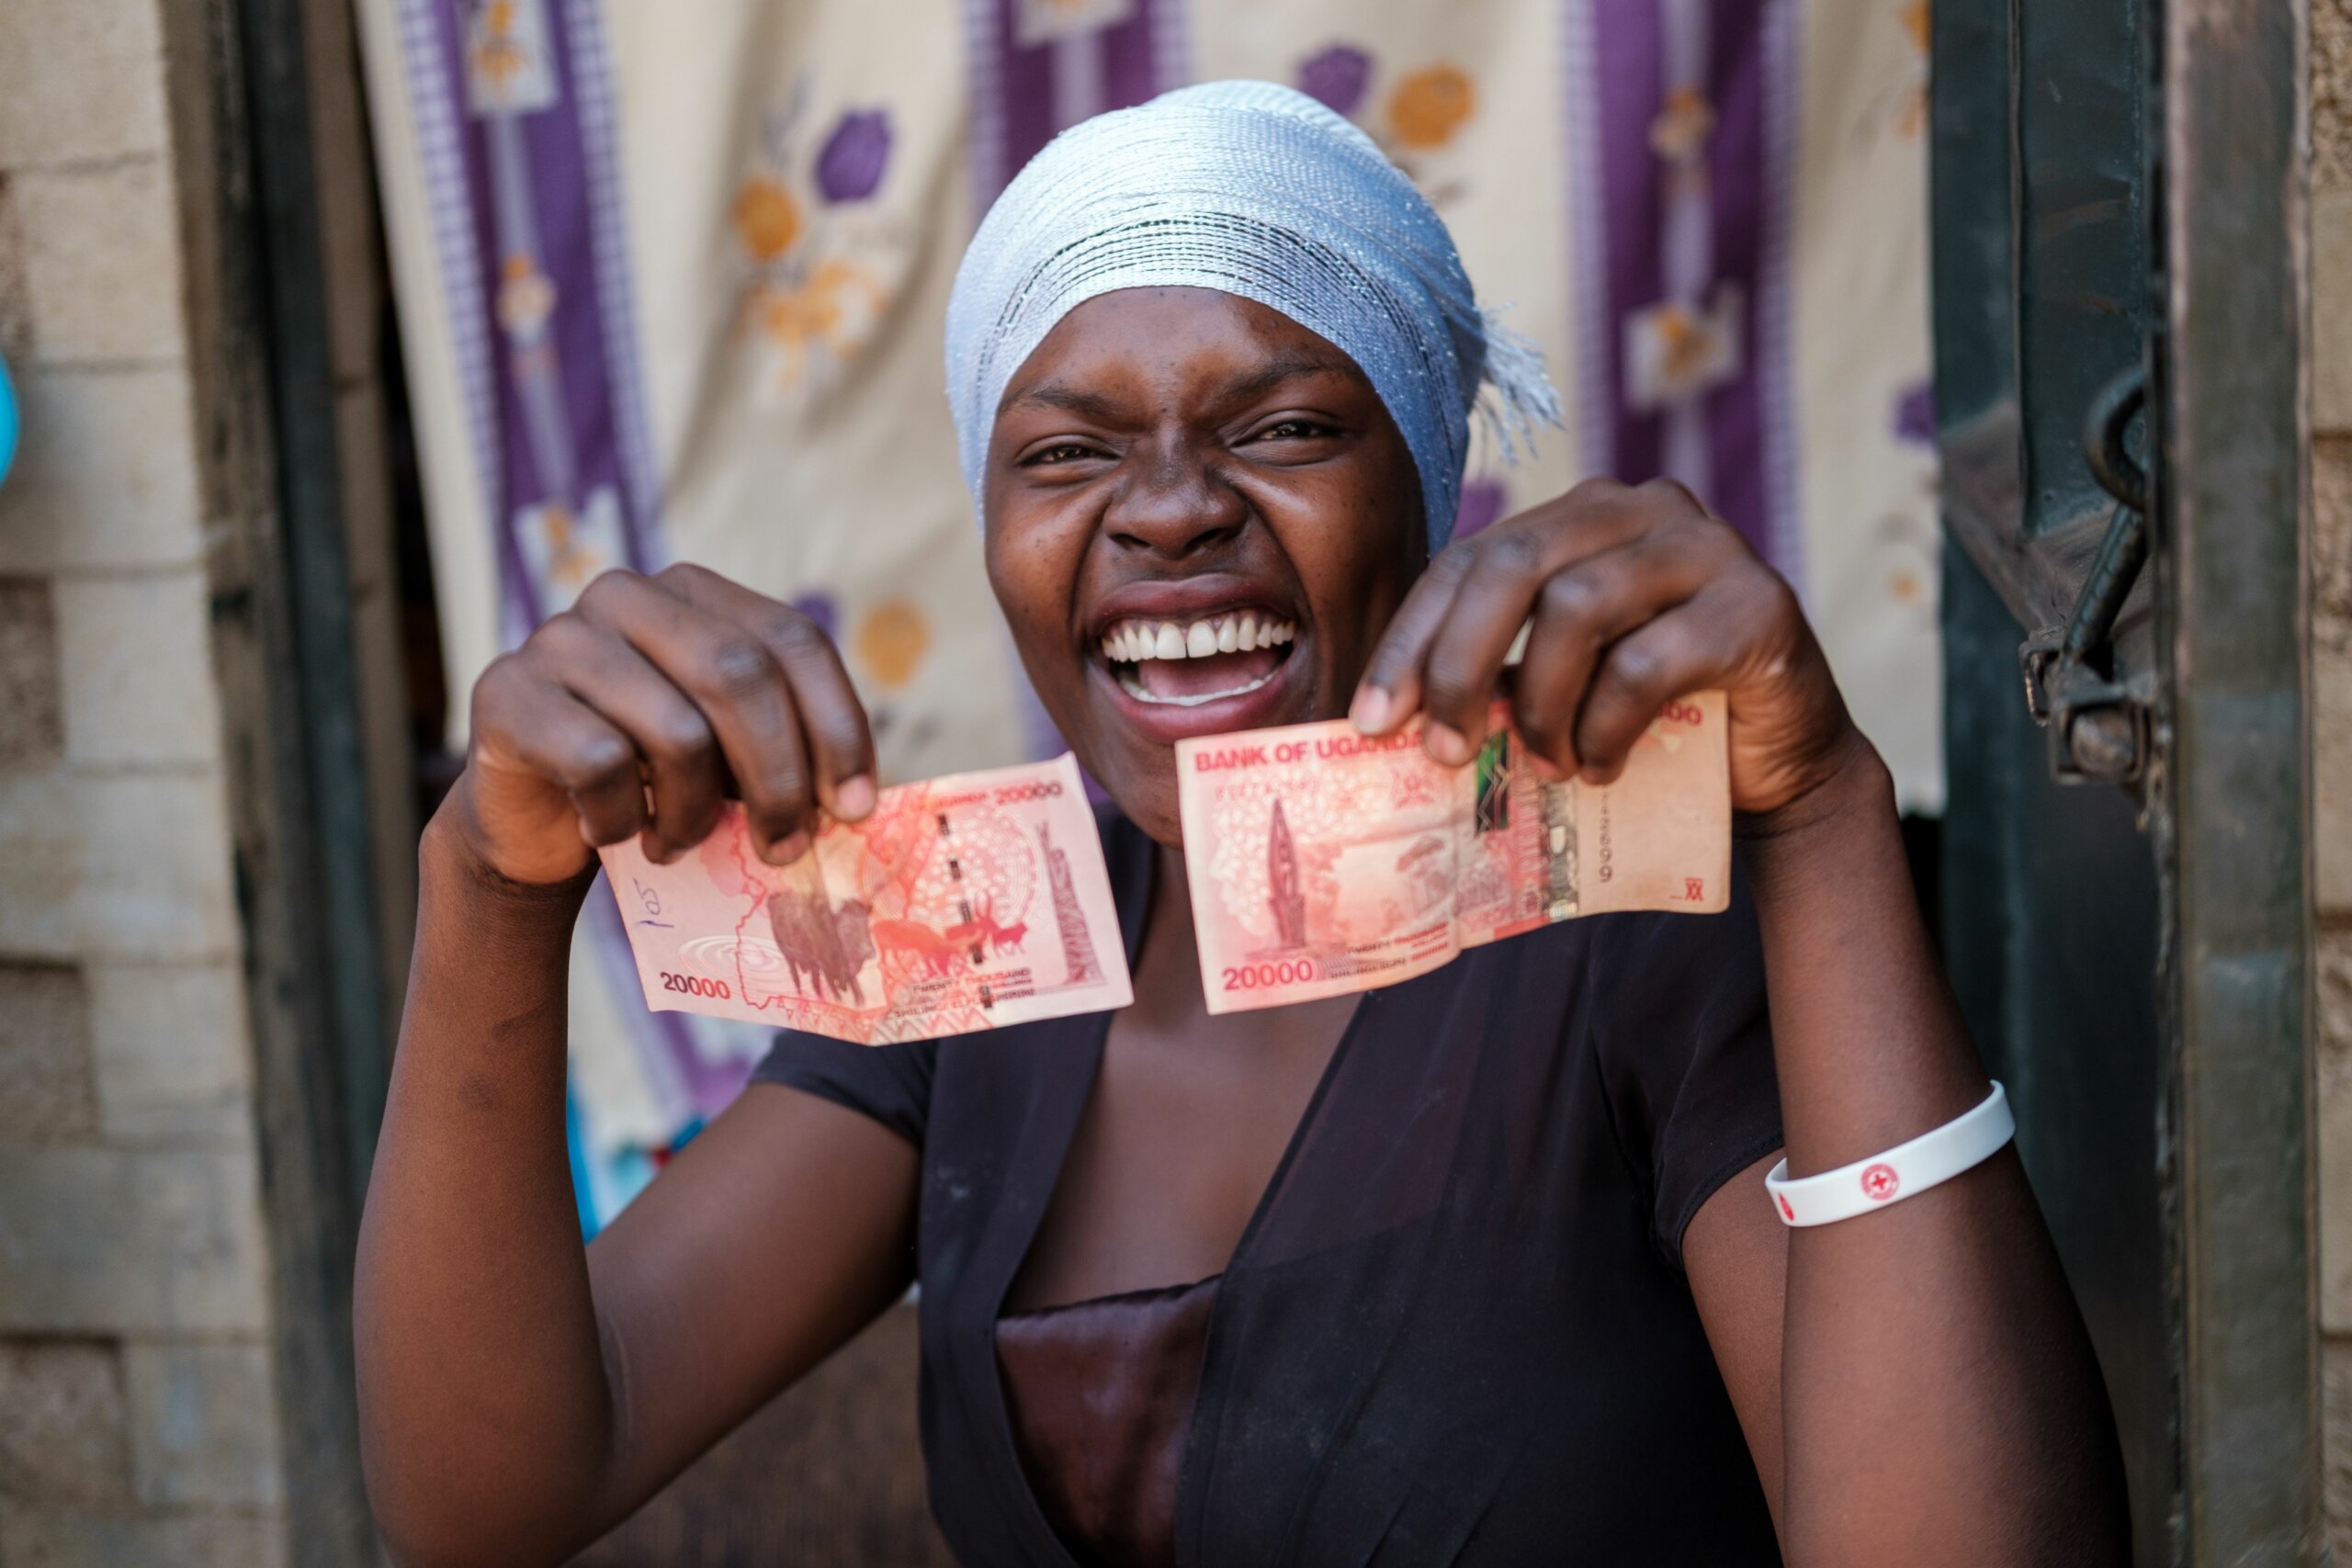 Image of one of the participants in the project: Overcoming Barriers to Food Security: A photo narrative by people with disabilities. She is holding banknotes and smiling.